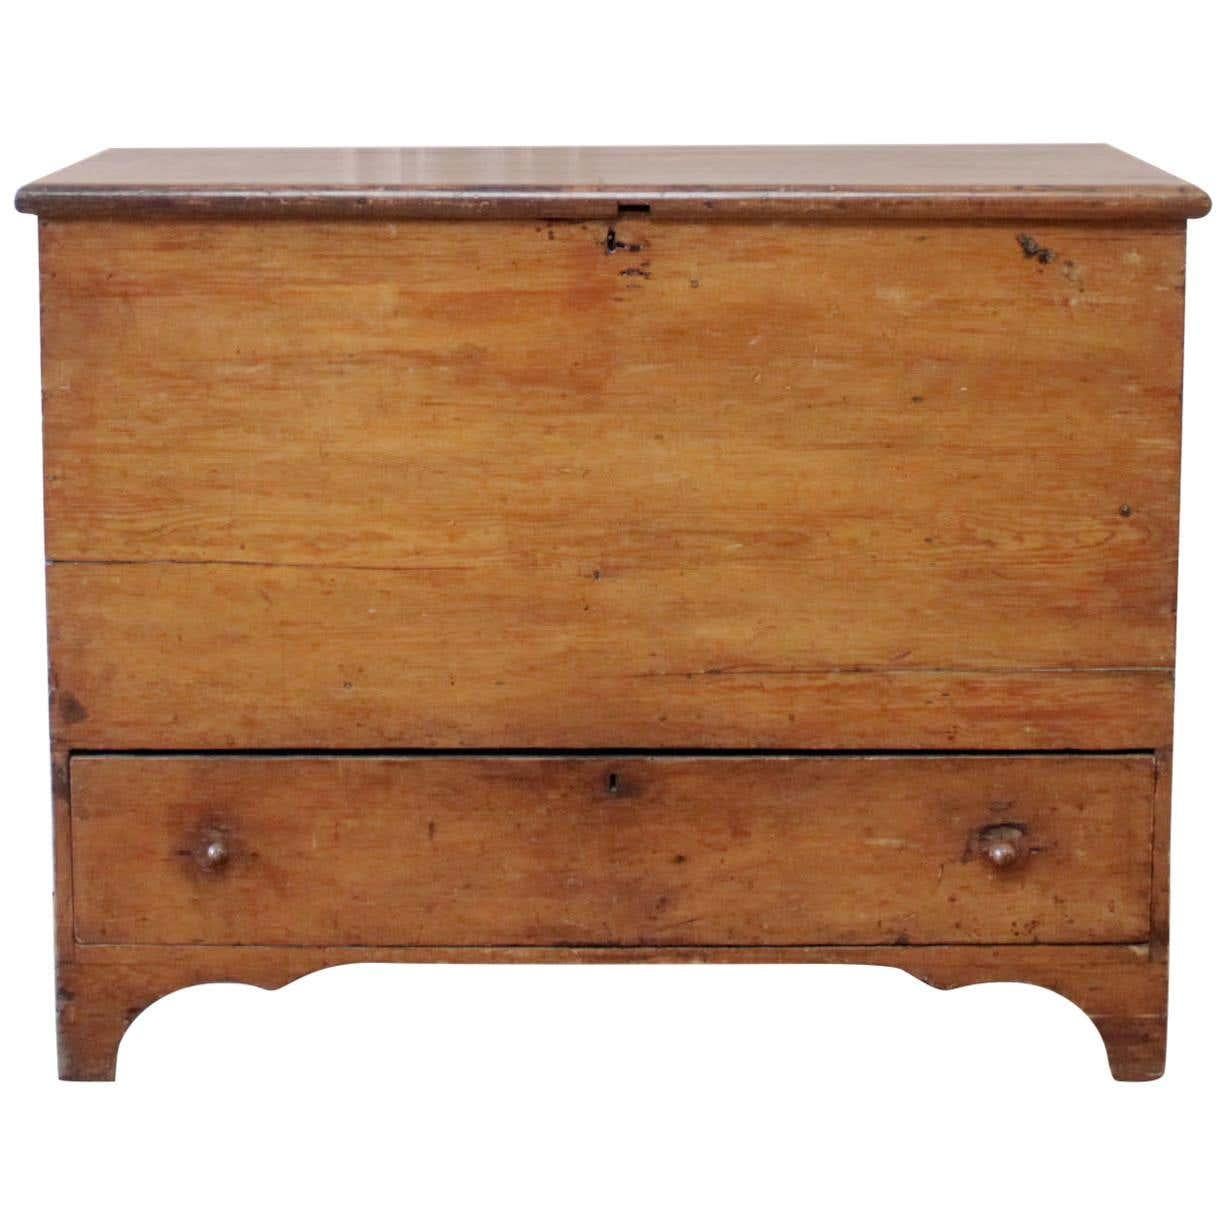 Antique primitive blanket chest entry table
This Primitive blanket chest we love as an entry or just as a commode table in any room.
Solid handmade, in a medium distressed stain, the top opens up (does not lock) hardware is still present. The